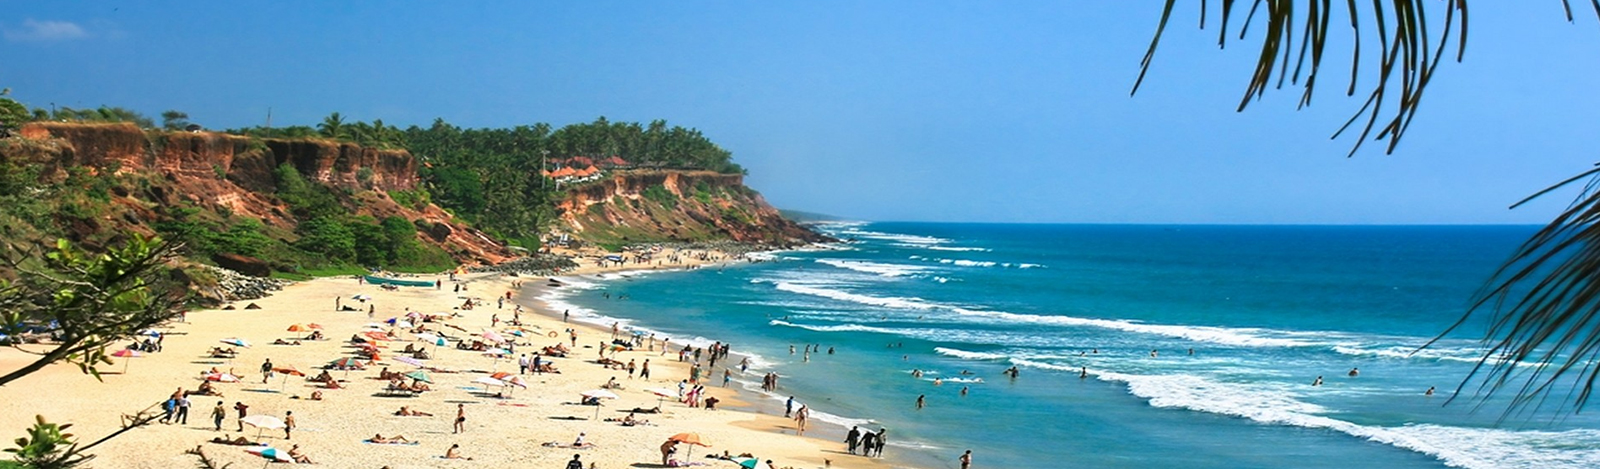 Best of Indian Beaches Tour